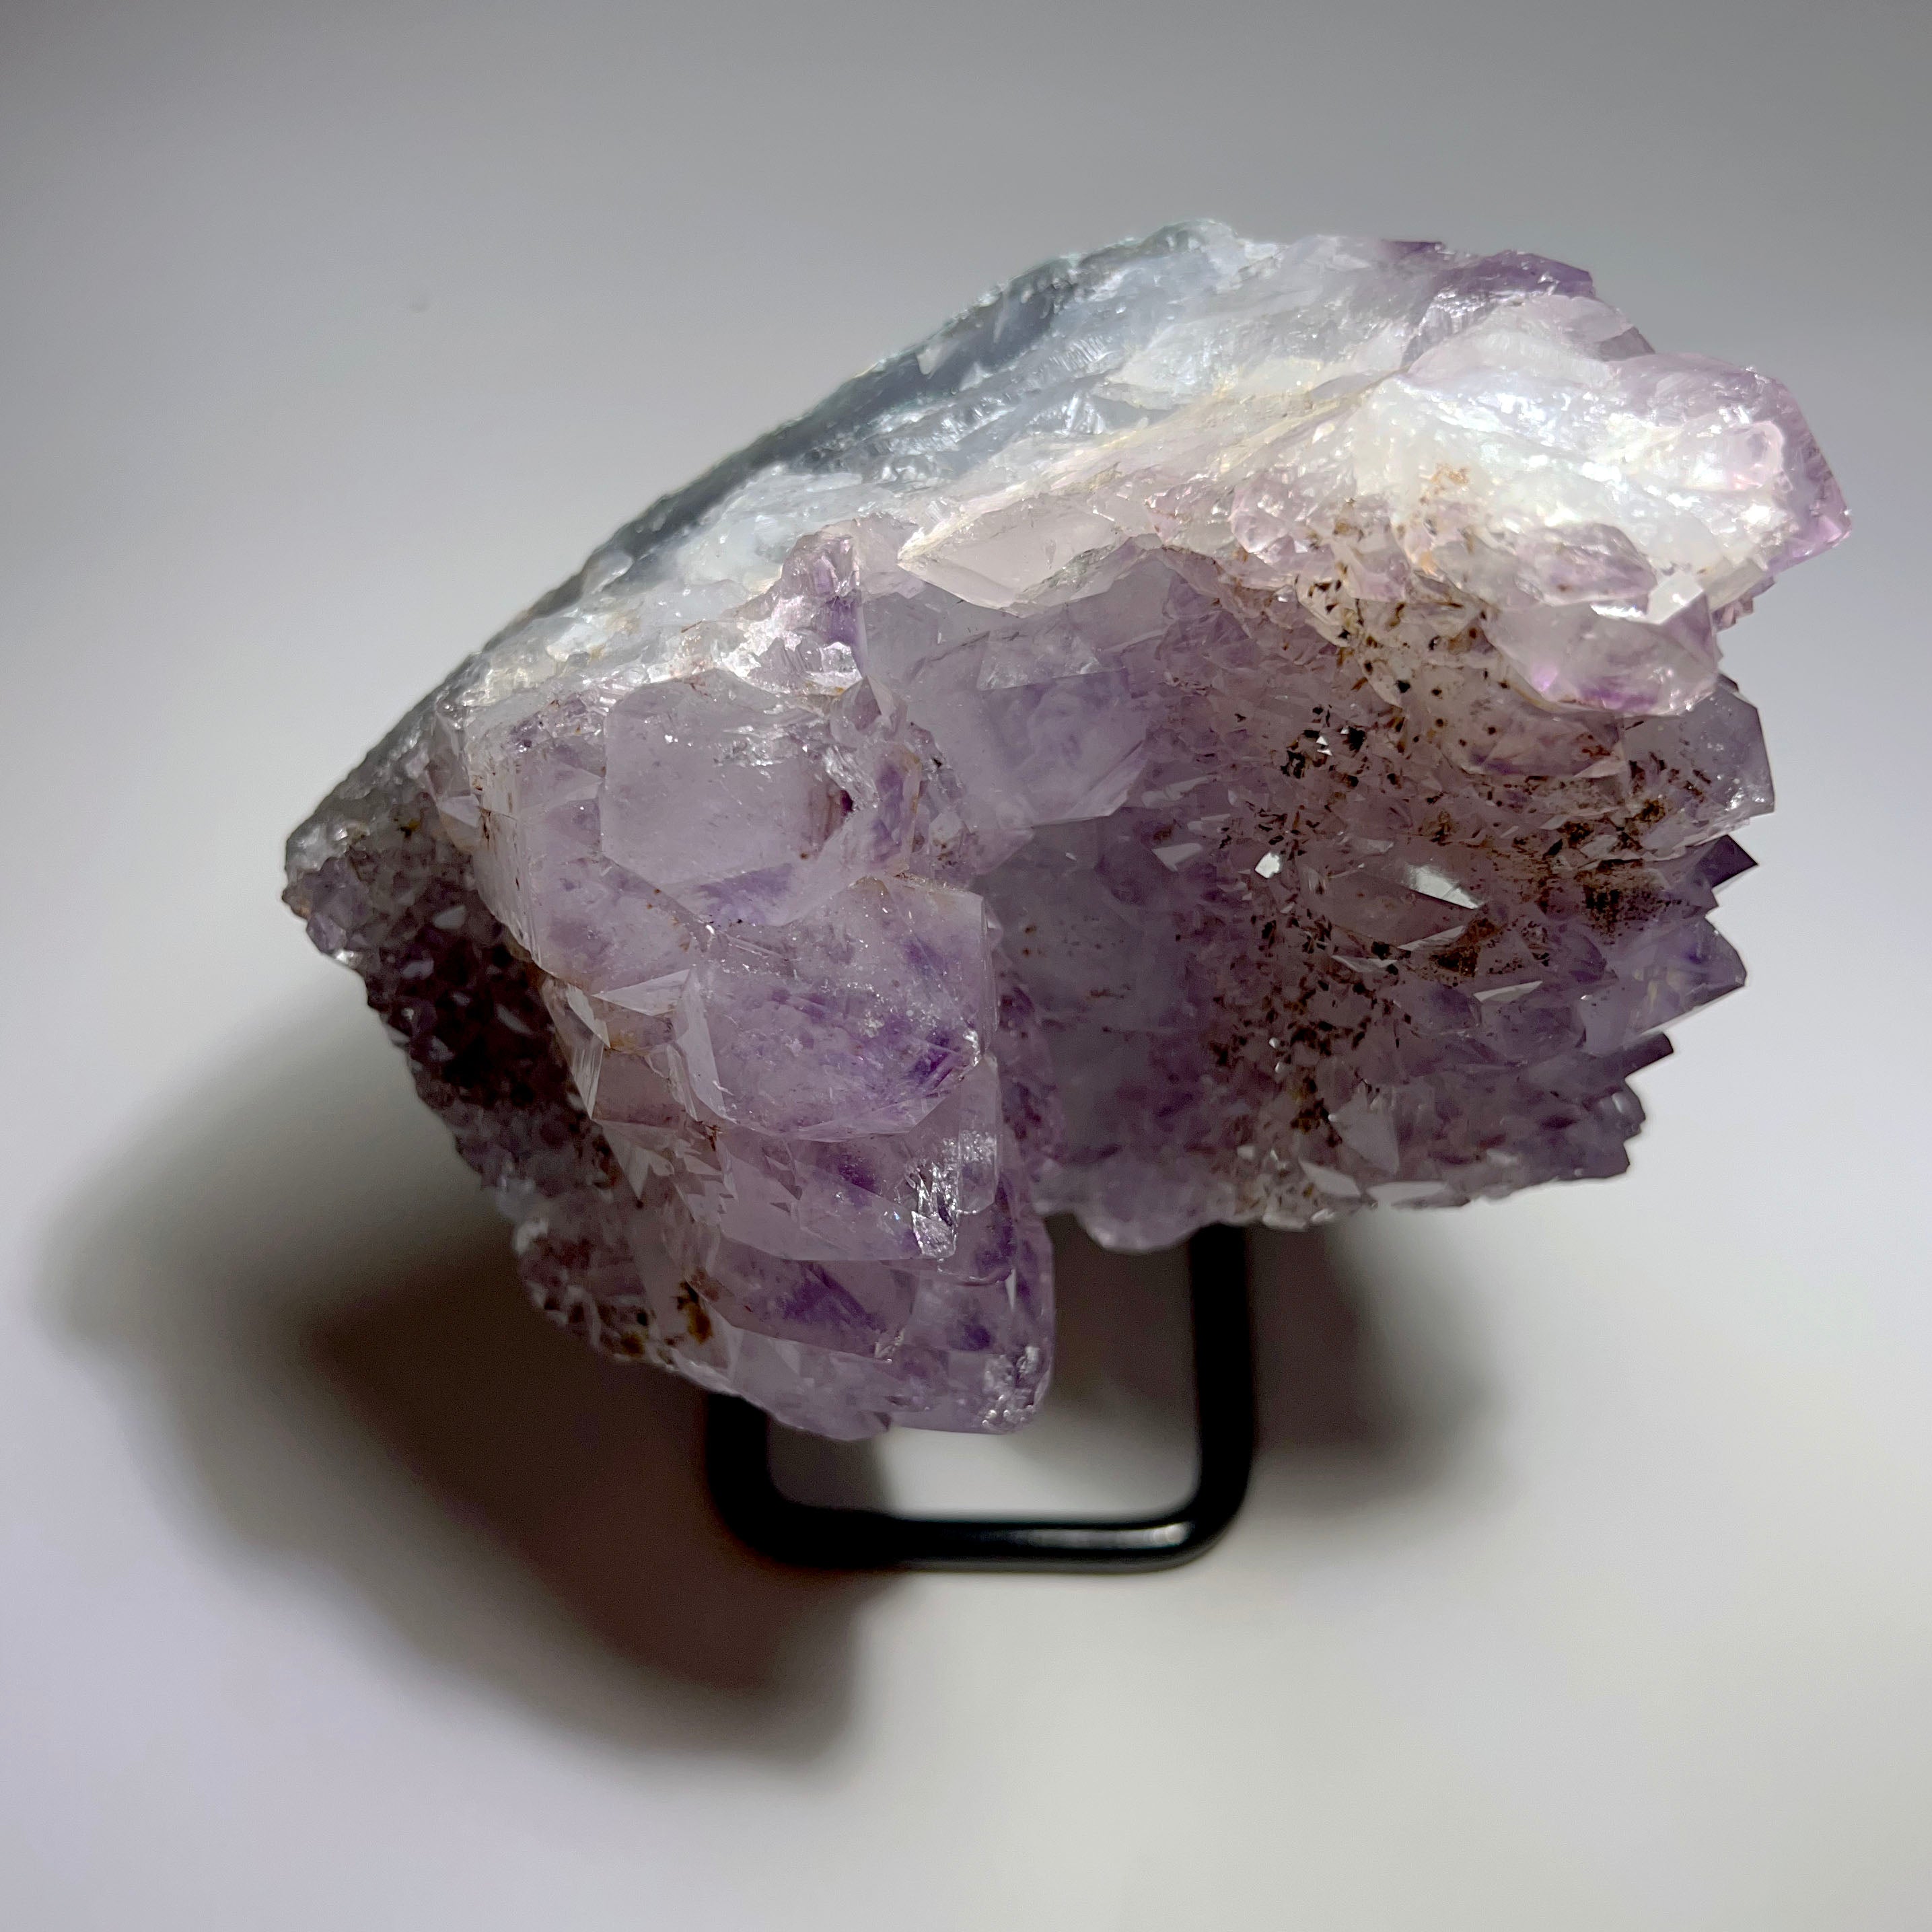 Amethyst with Goethite on stand